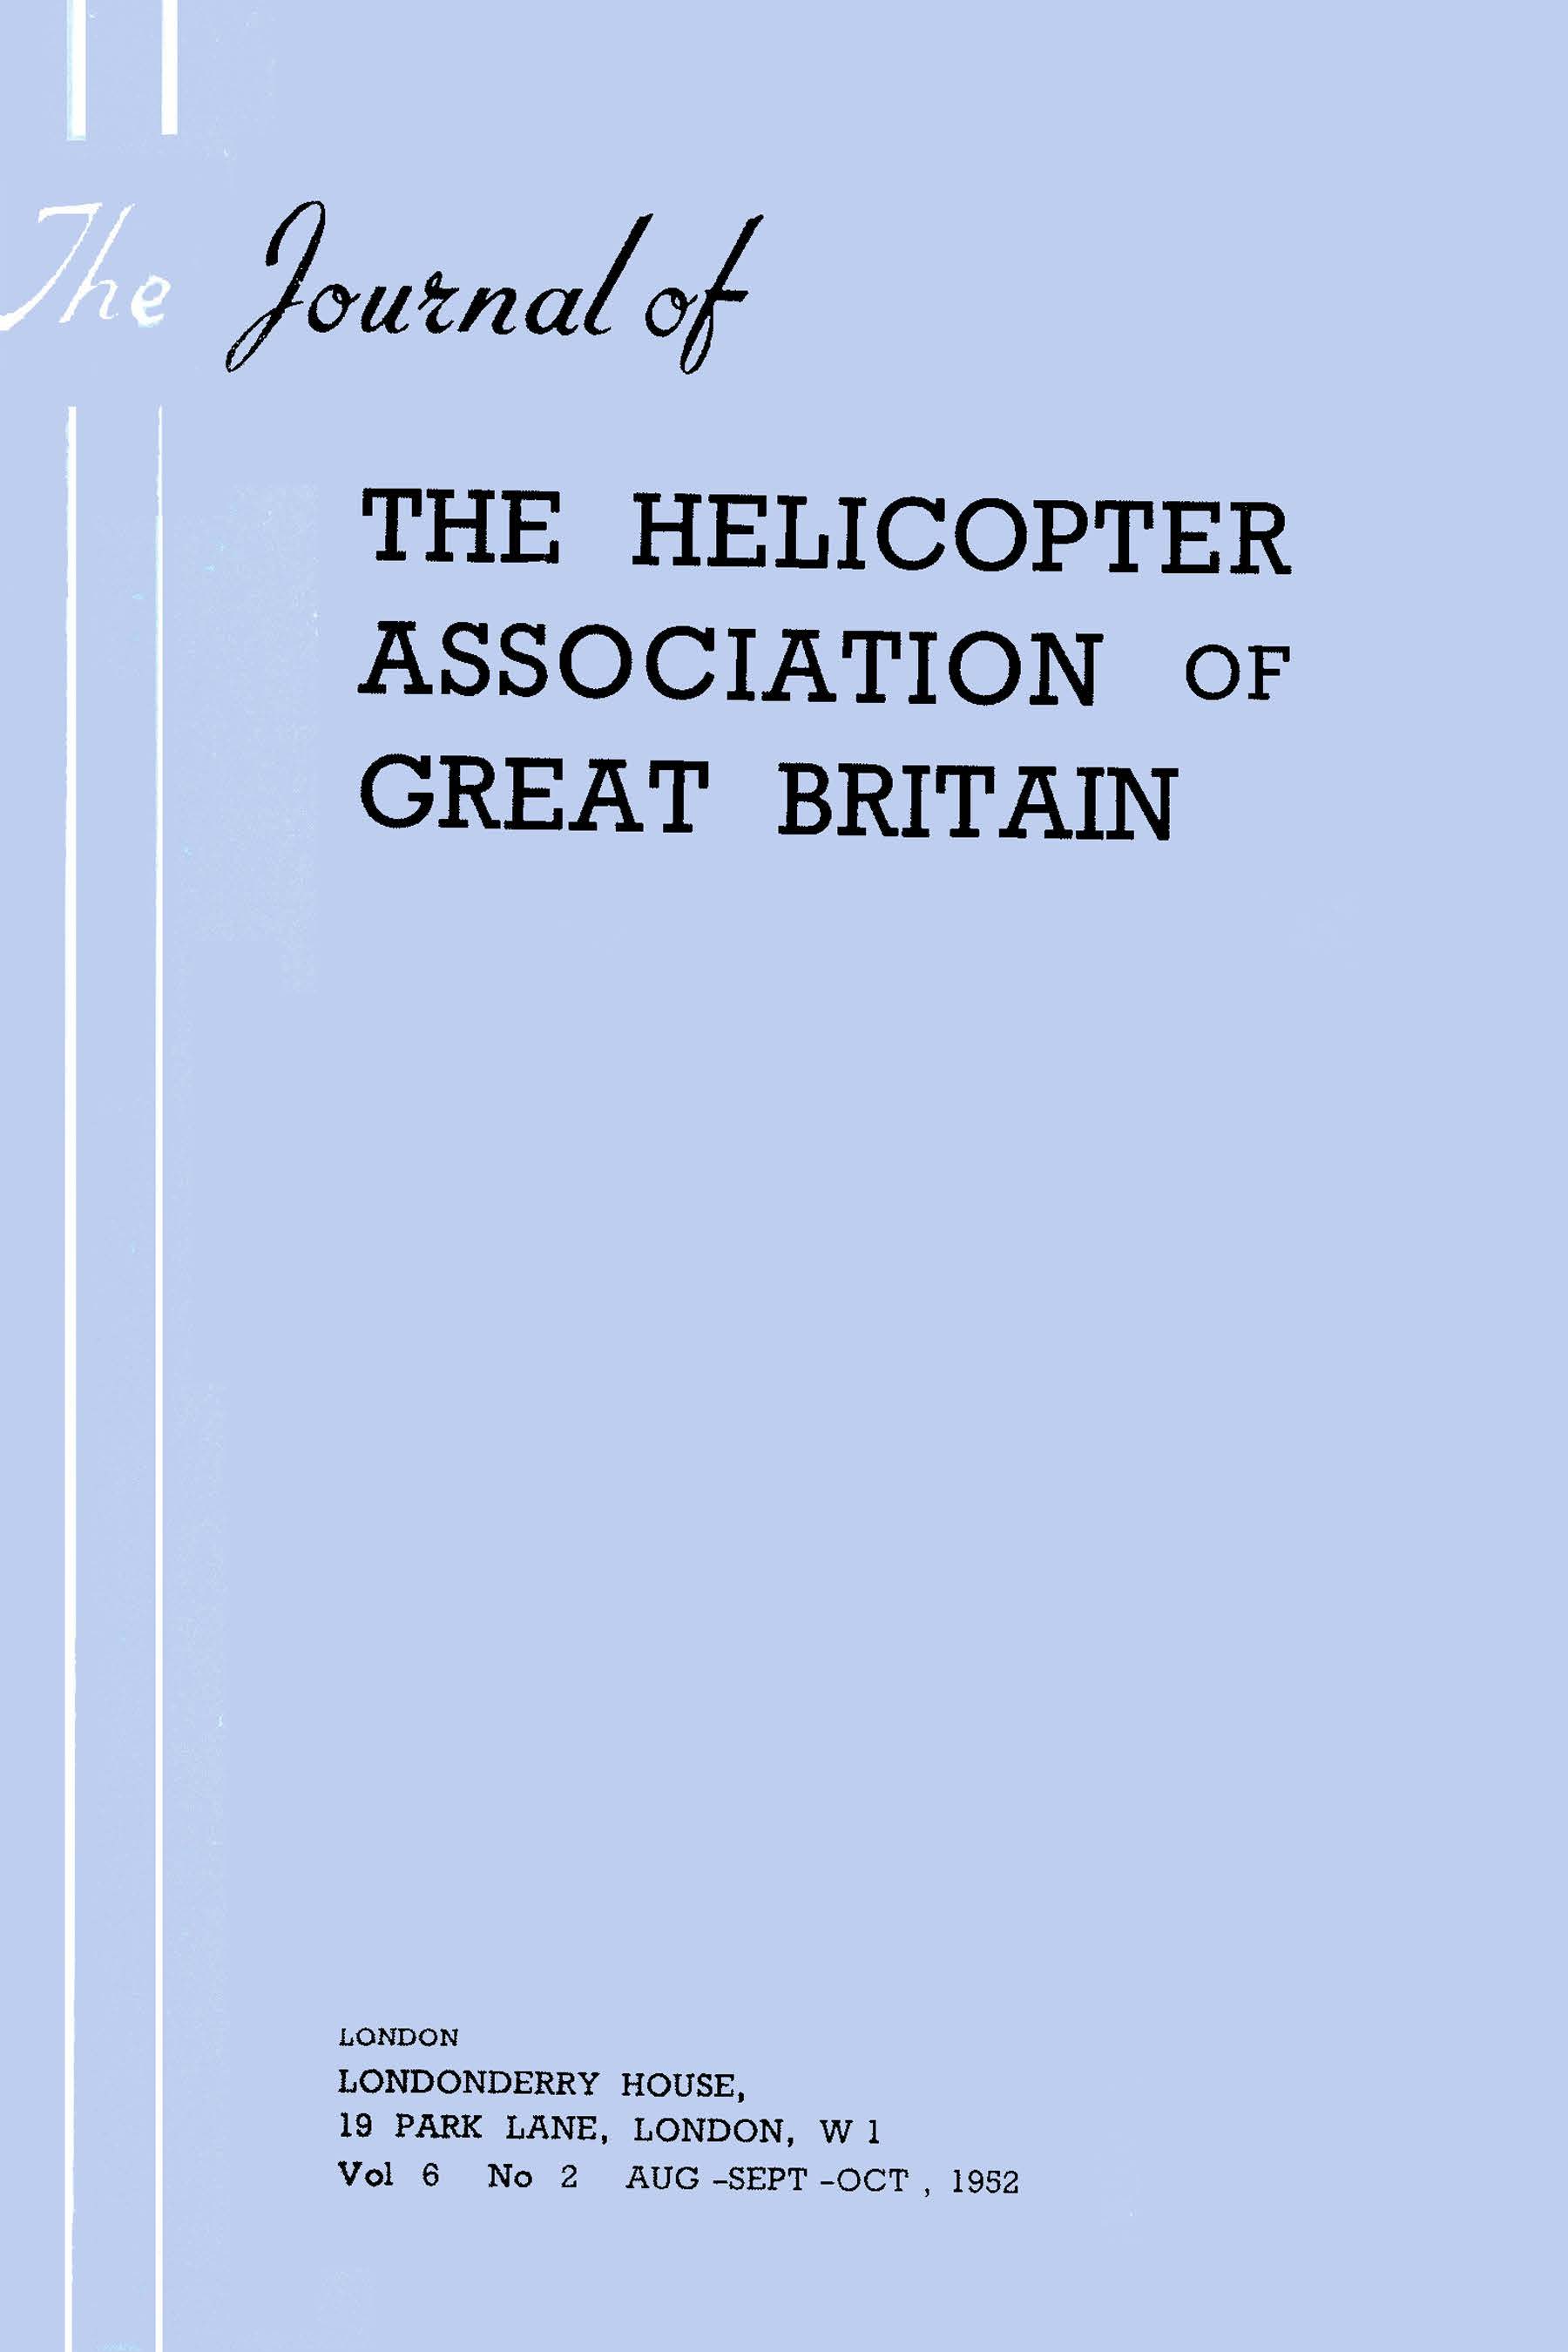 The Journal of the Helicopter Association of Great Britain